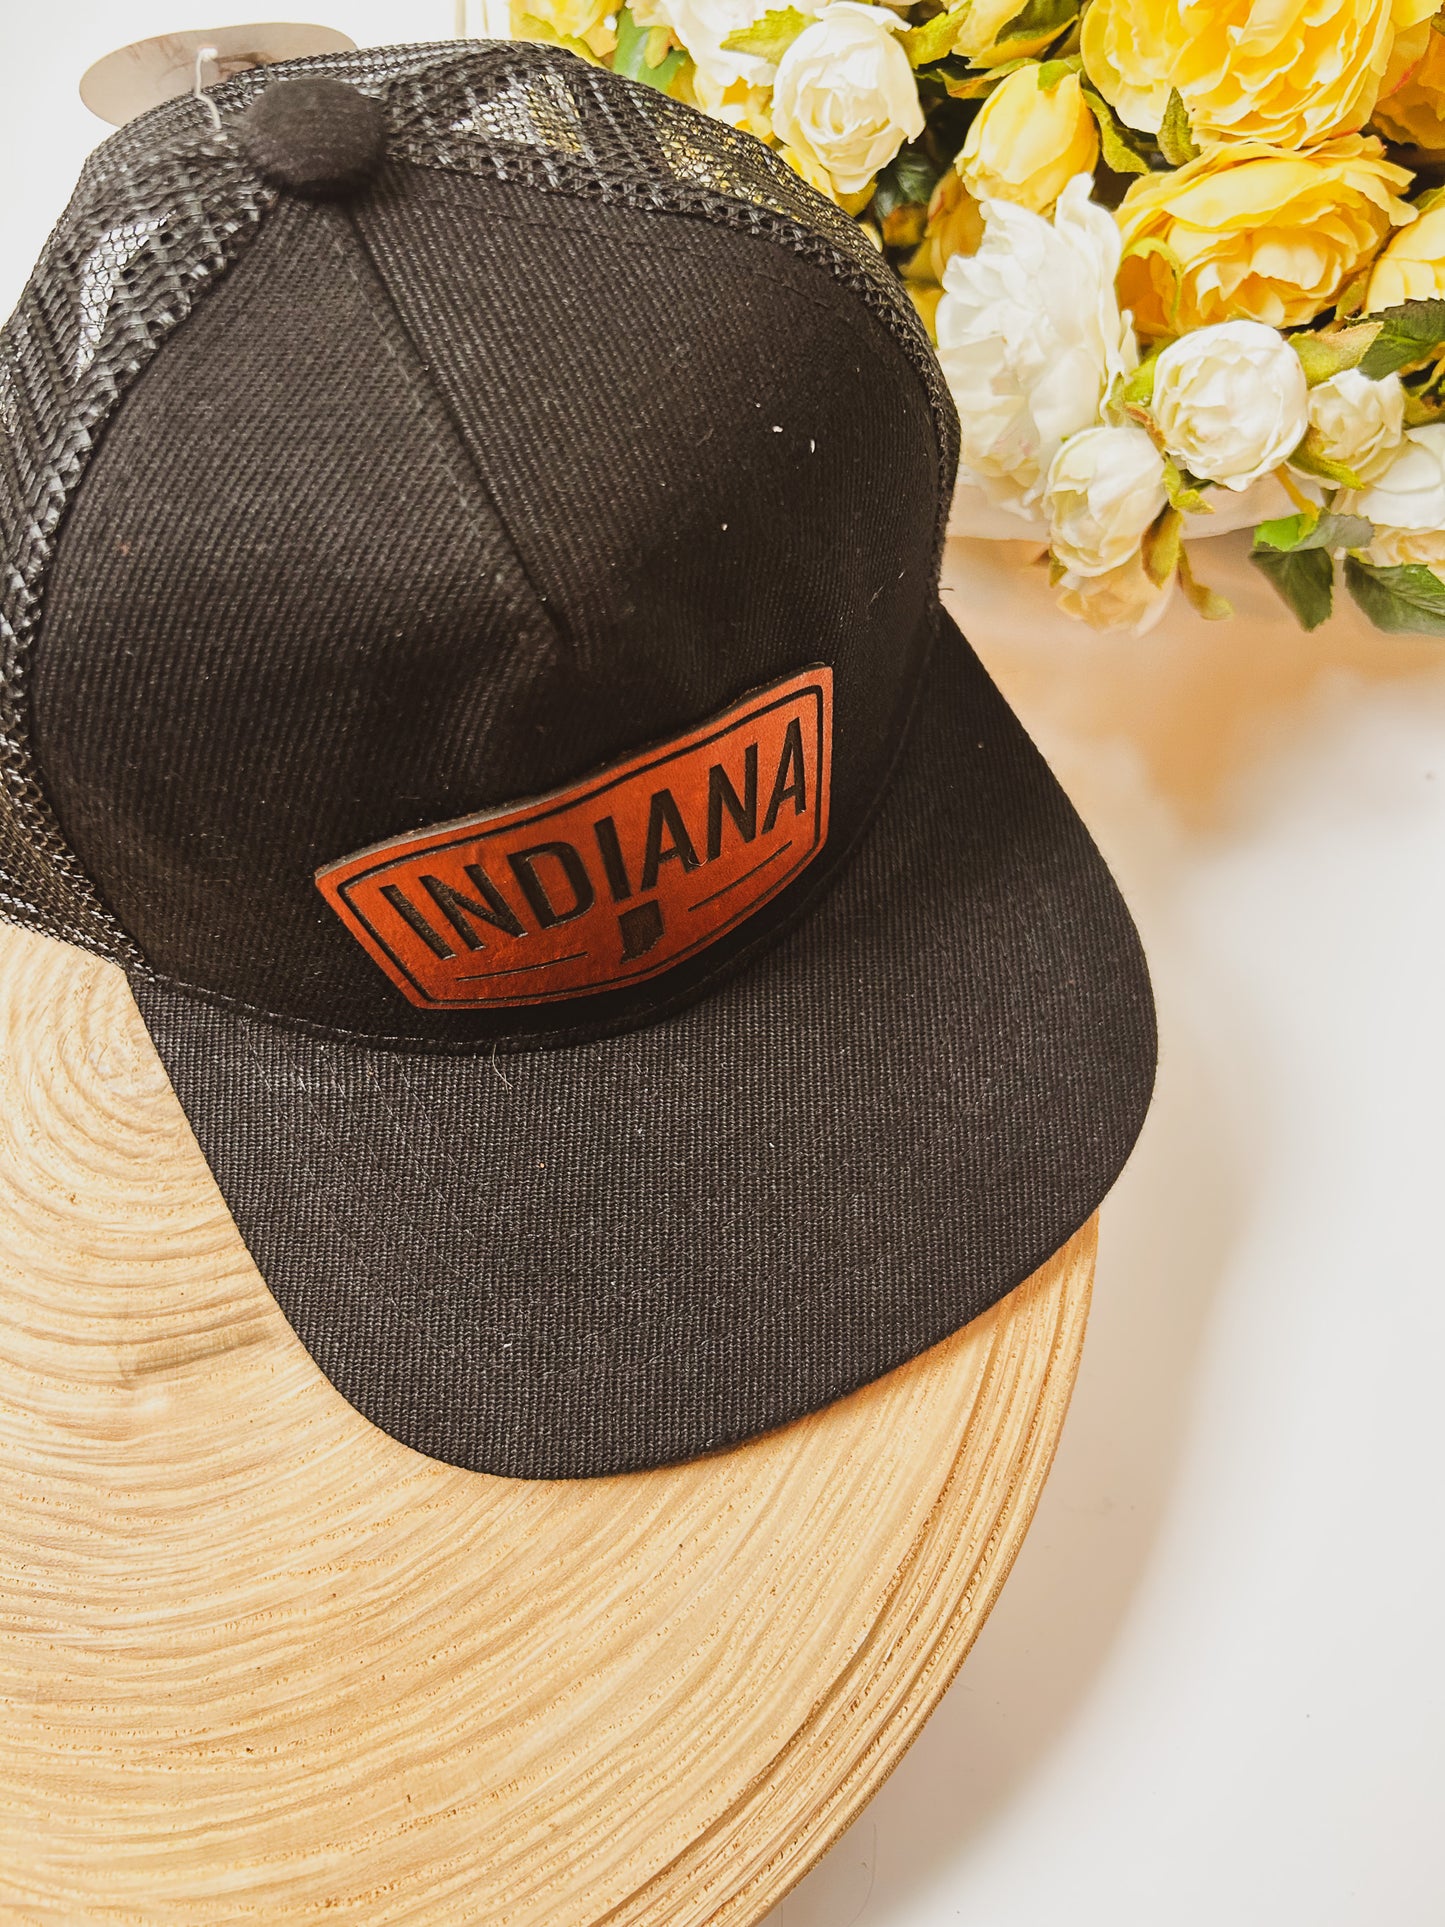 Rectangular Indiana Leather Patch on Black Trucker Hat